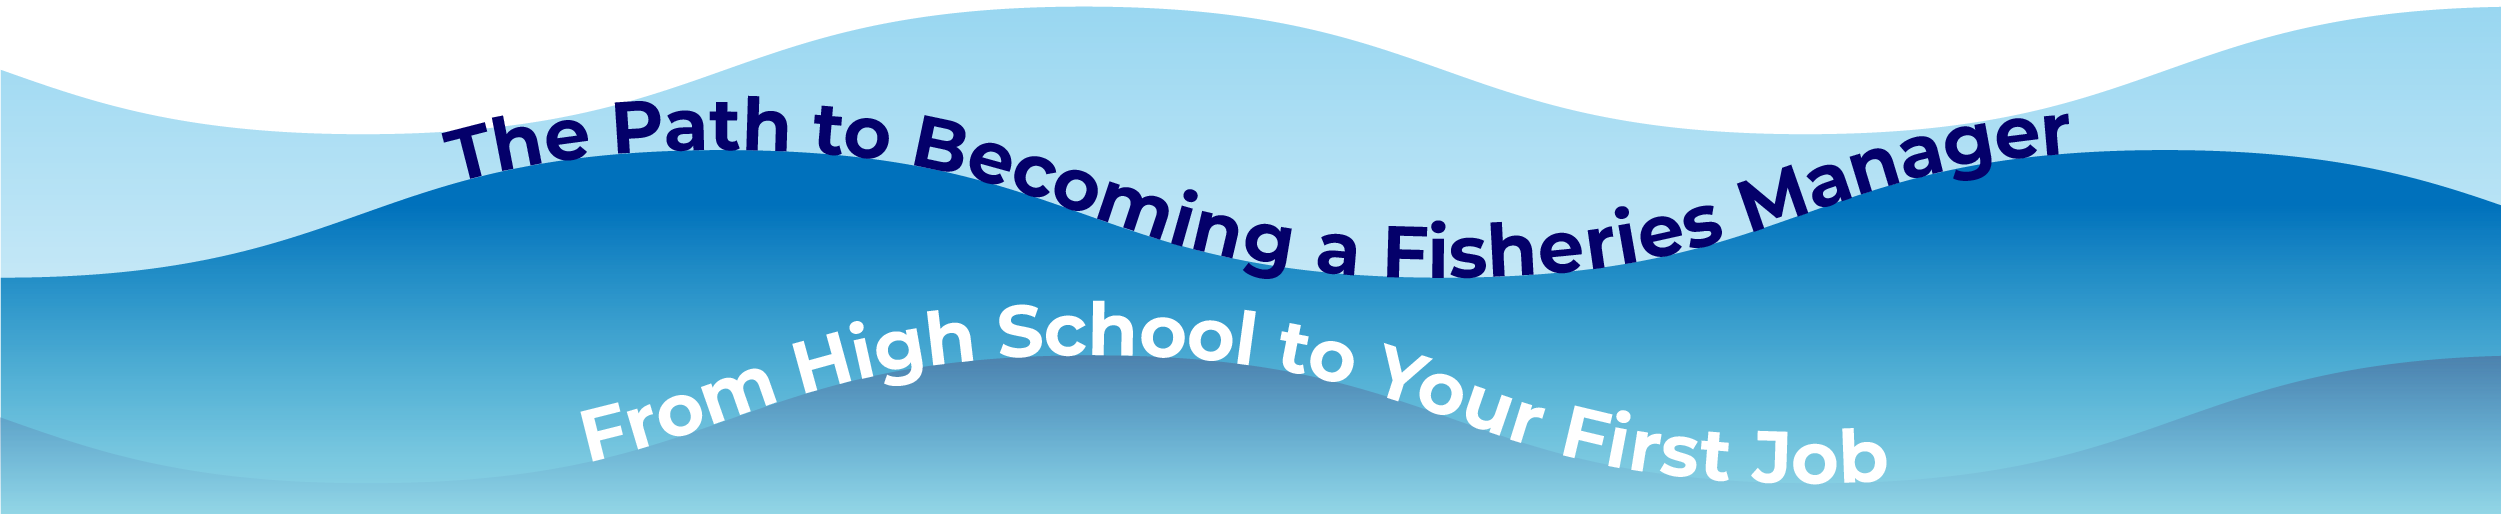 The path to becoming a fisheries manager